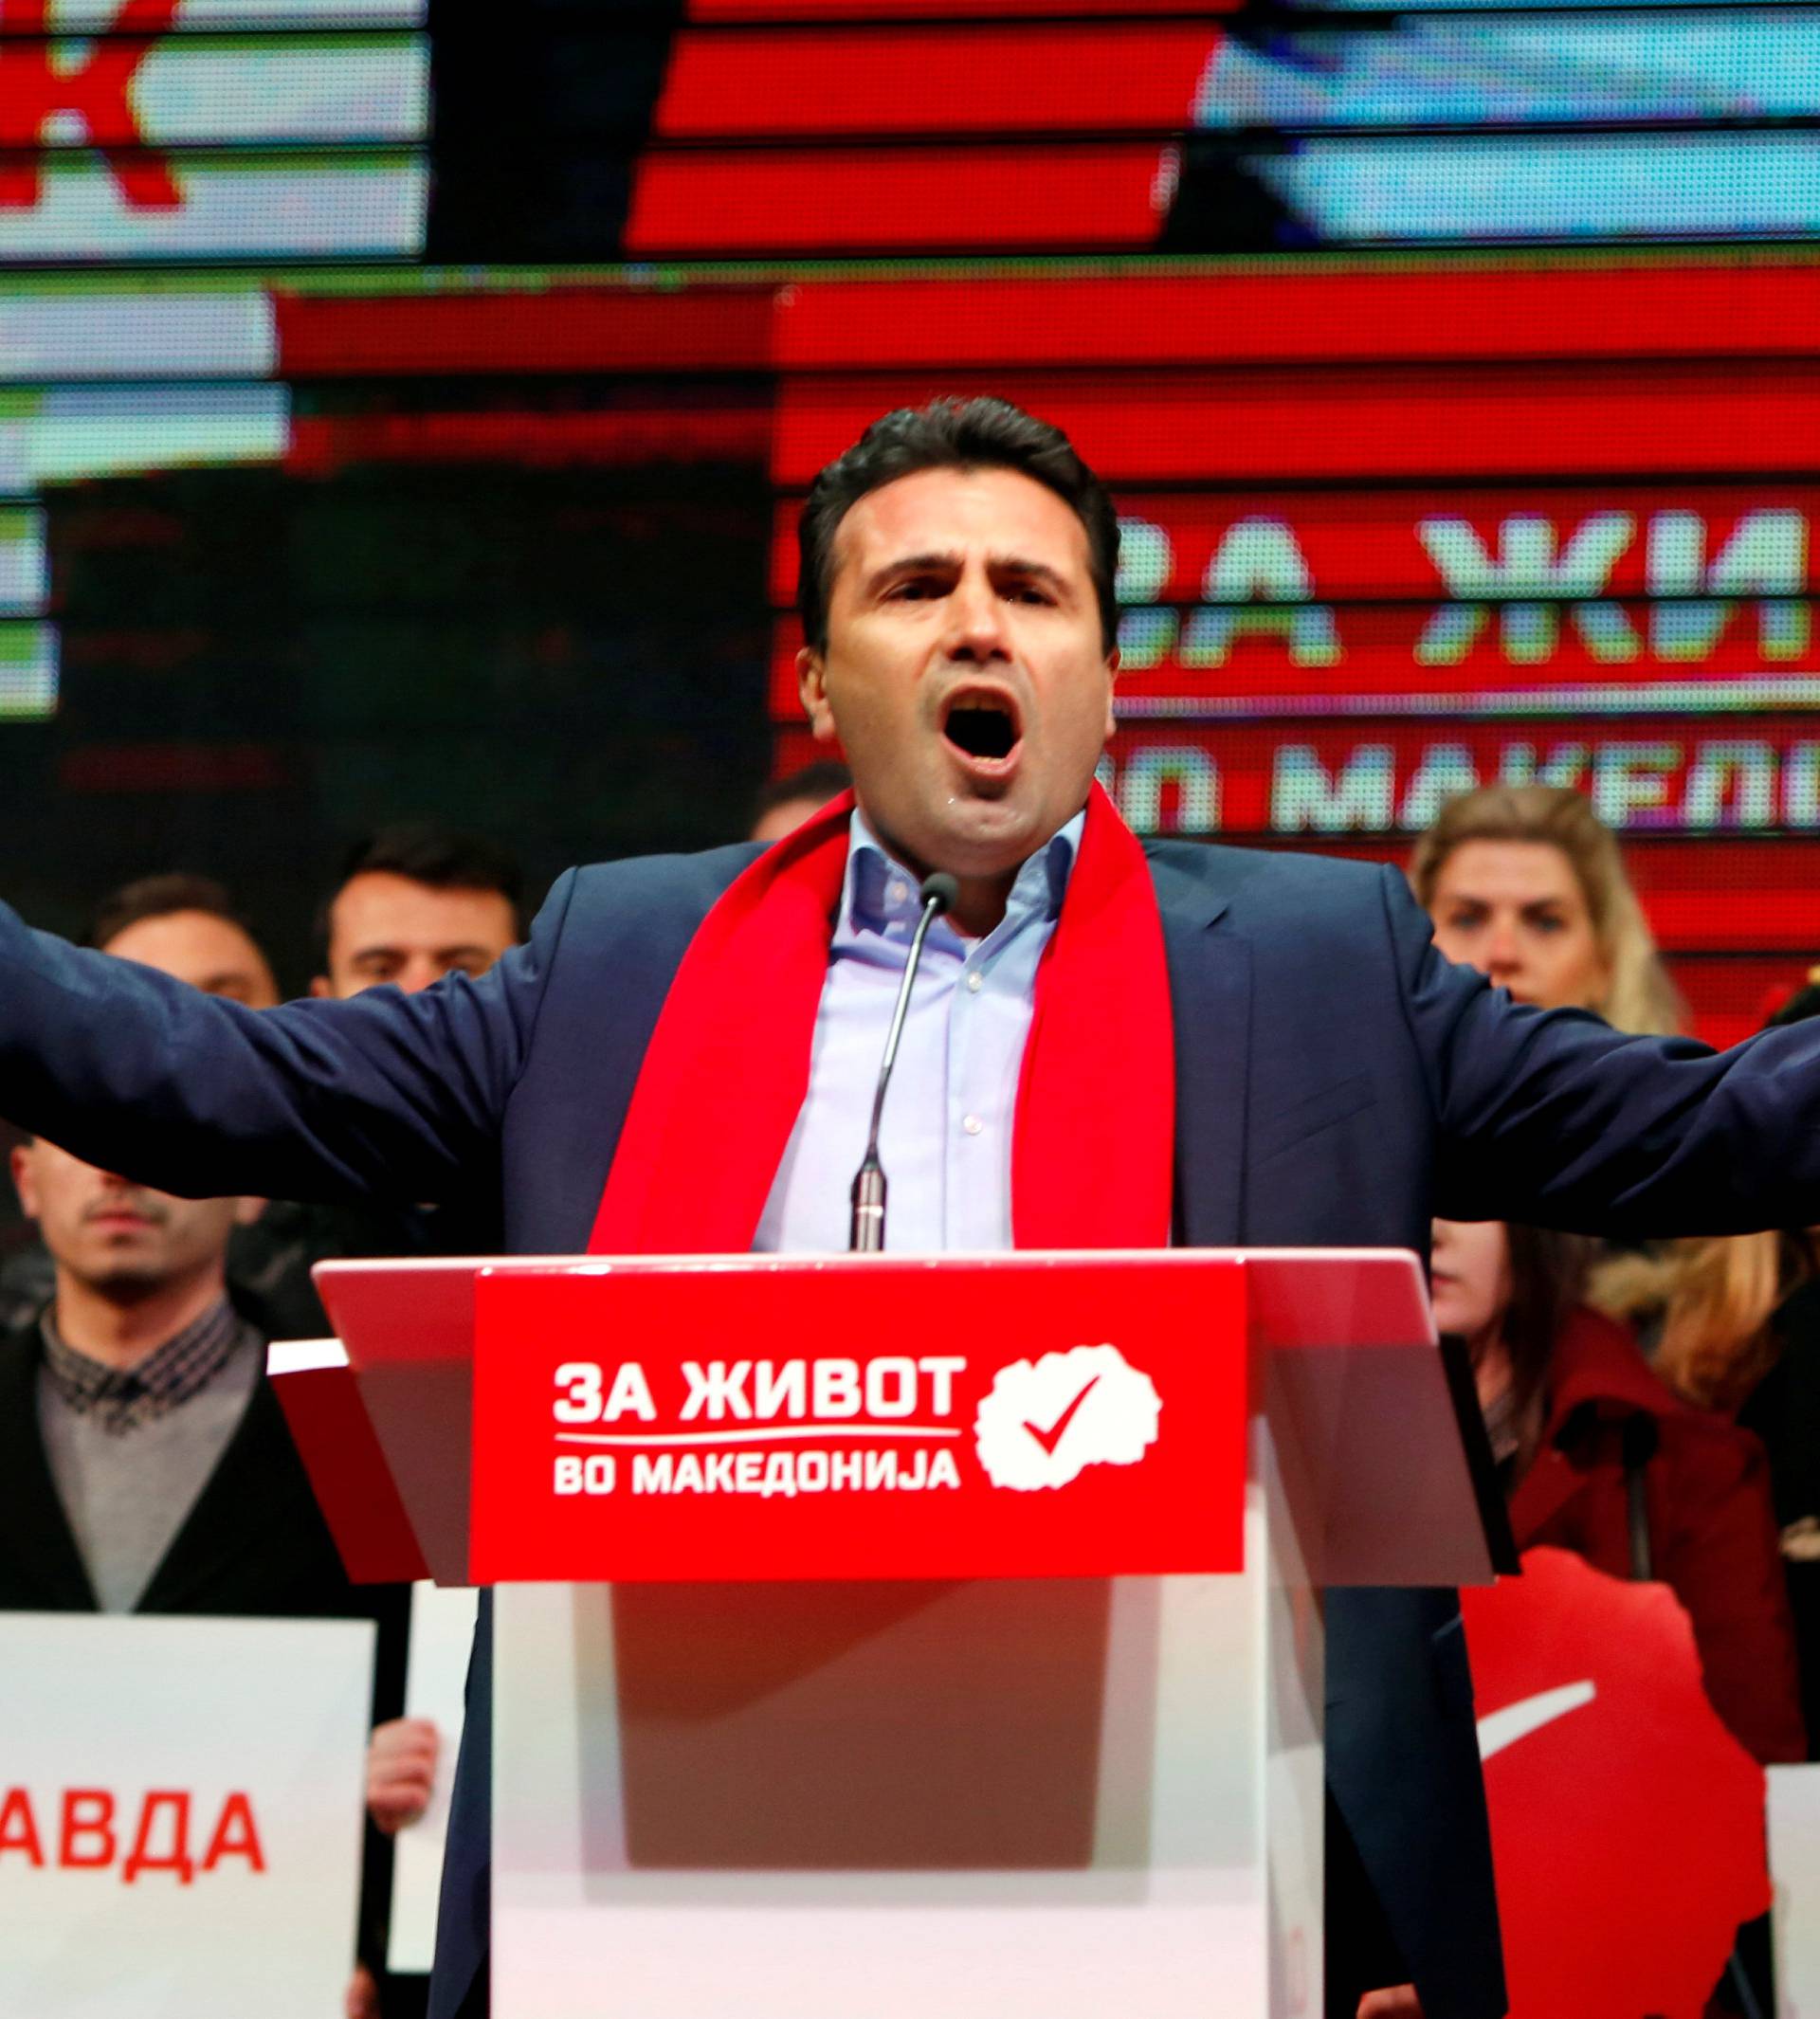 FILE PHOTO: The leader of the biggest opposition party SDSM Zoran Zaev greets supporters during a pre election rally in Skopje